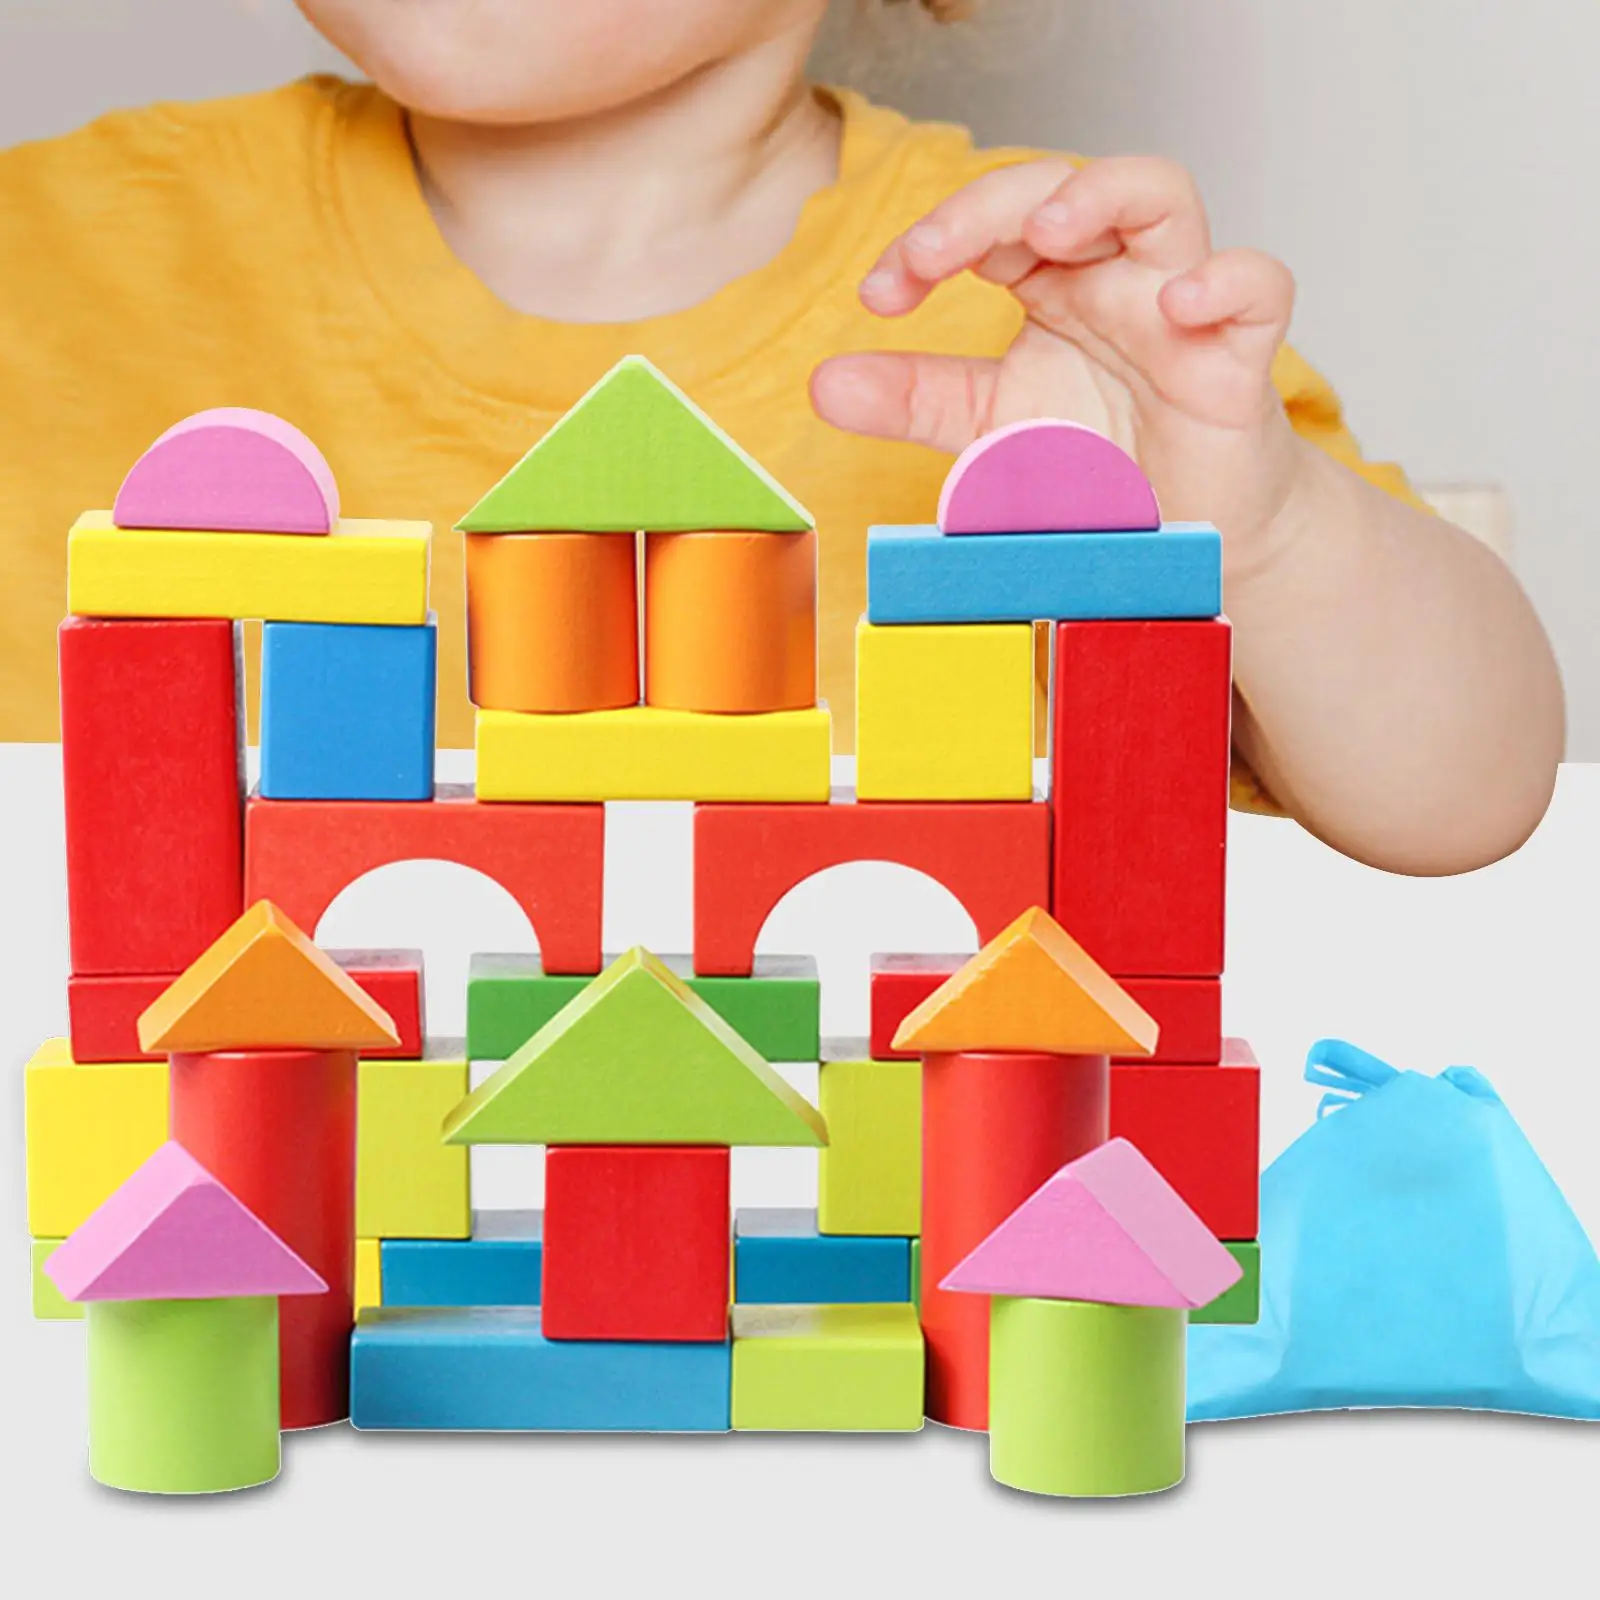 40Pcs Wooden Building Blocks Early Educational for Boys Children Gifts